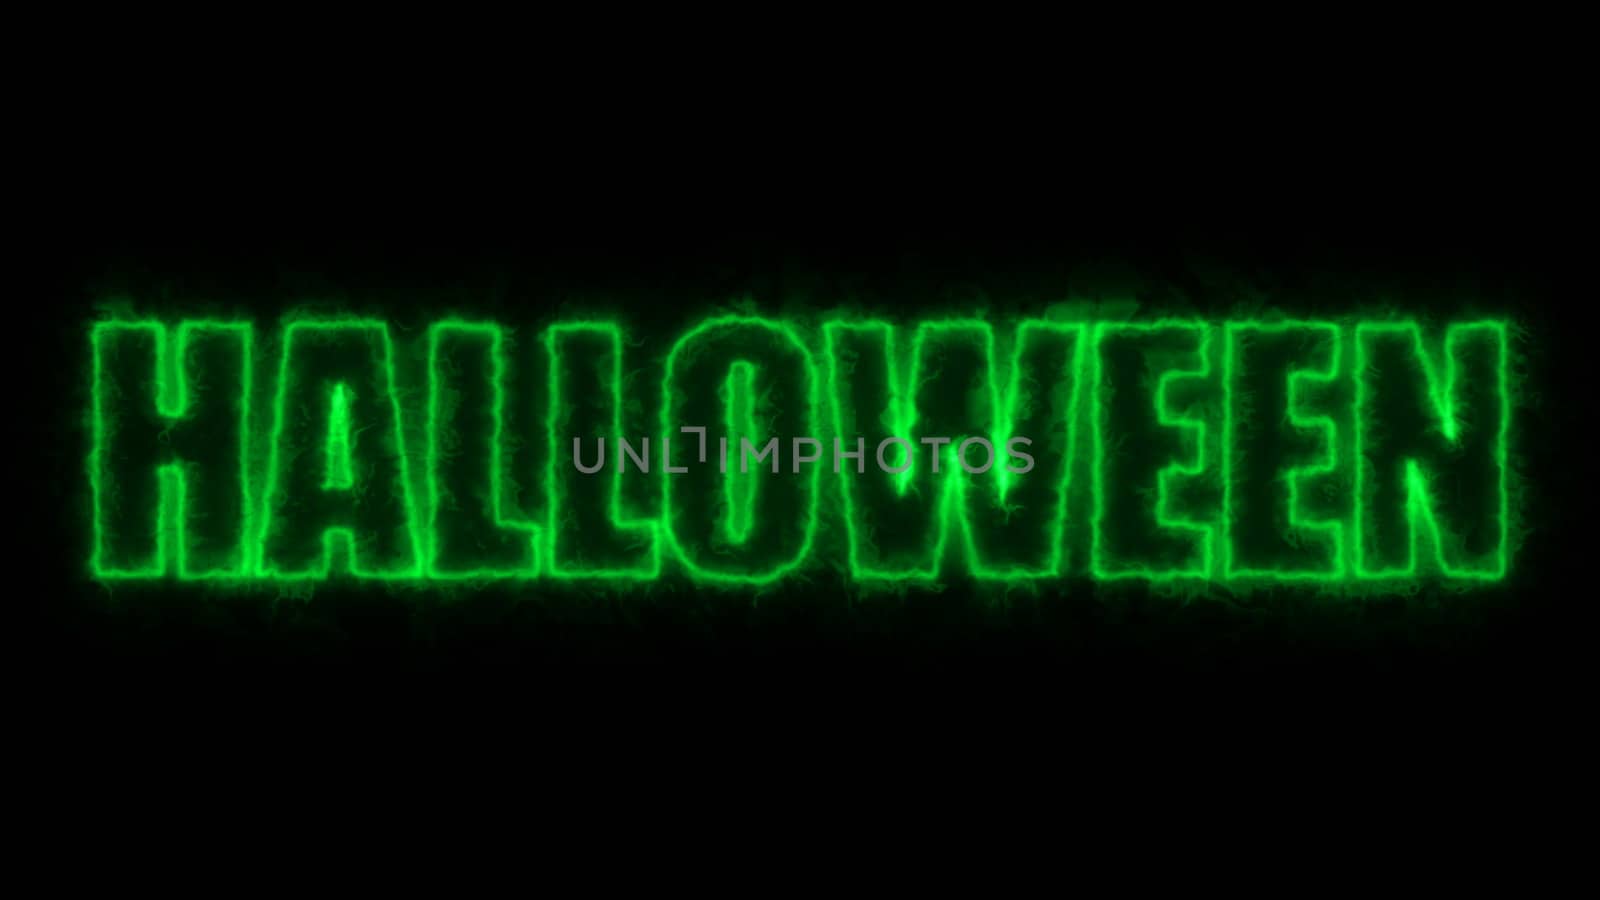 Halloween text, 3d rendering background, computer generating, can be used for holidays festive design